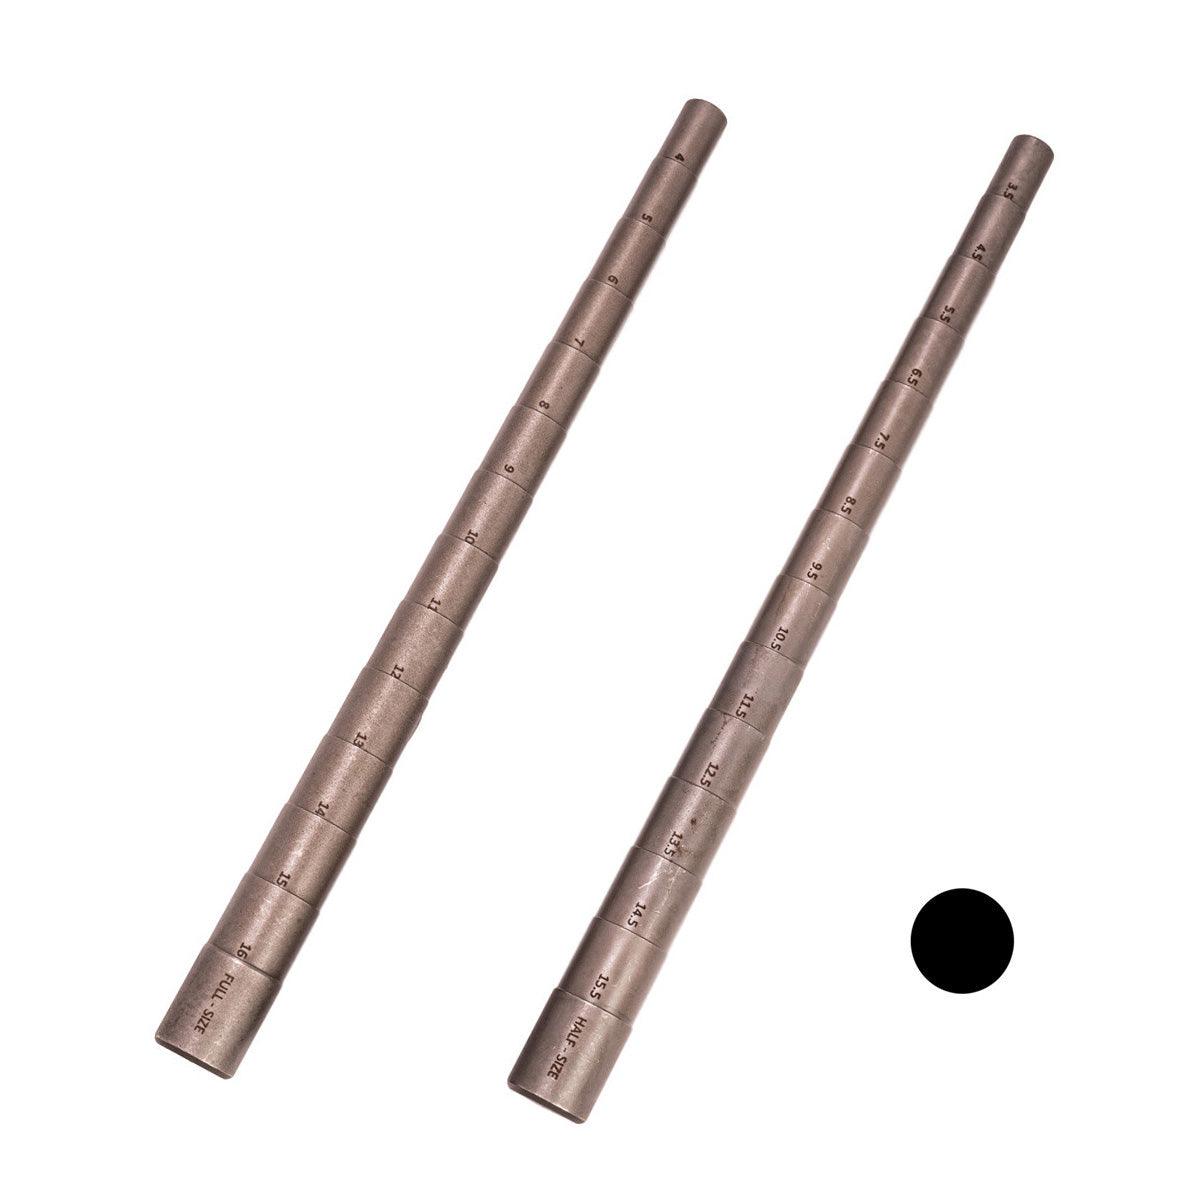 Oval Stepped Hollow Bracelet Mandrel With Tang Sizes: 2”, 2.1⁄4”, 2.1⁄2”,  2.3⁄4”